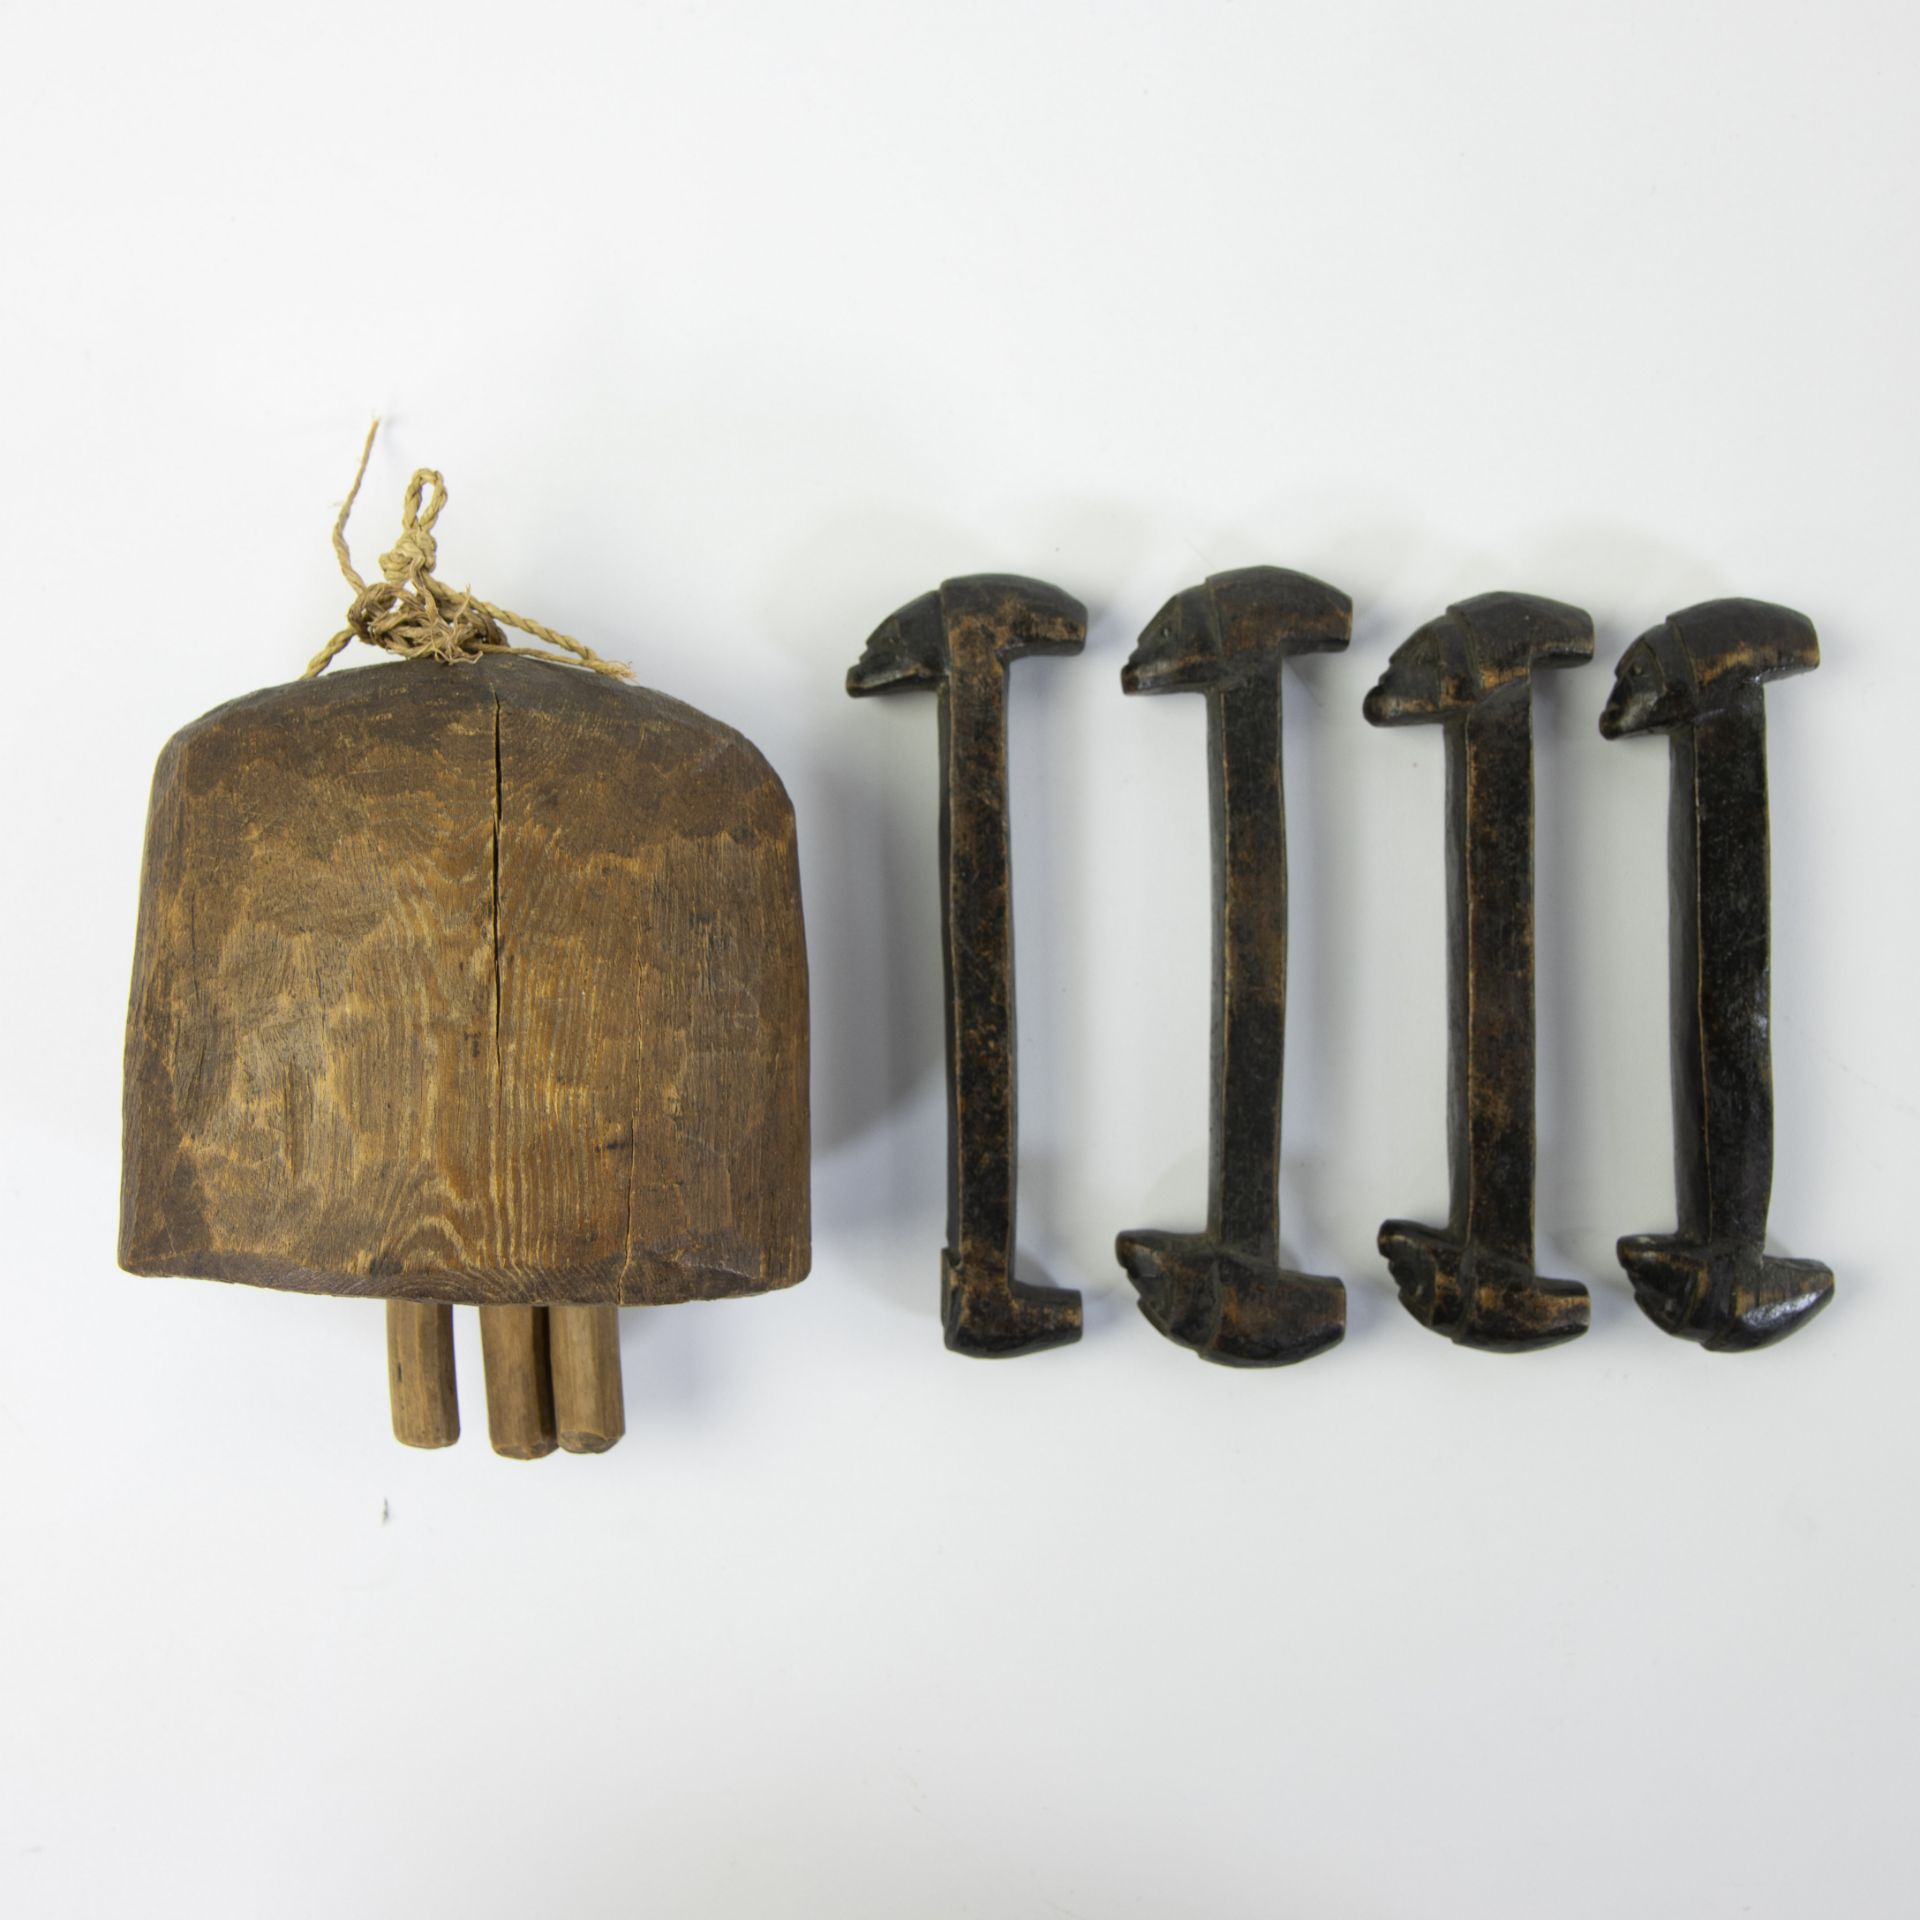 Tribal objects from Kilo-Moto (Belgian Congo) period 1927, 4 rattles and wooden bell - Image 3 of 3